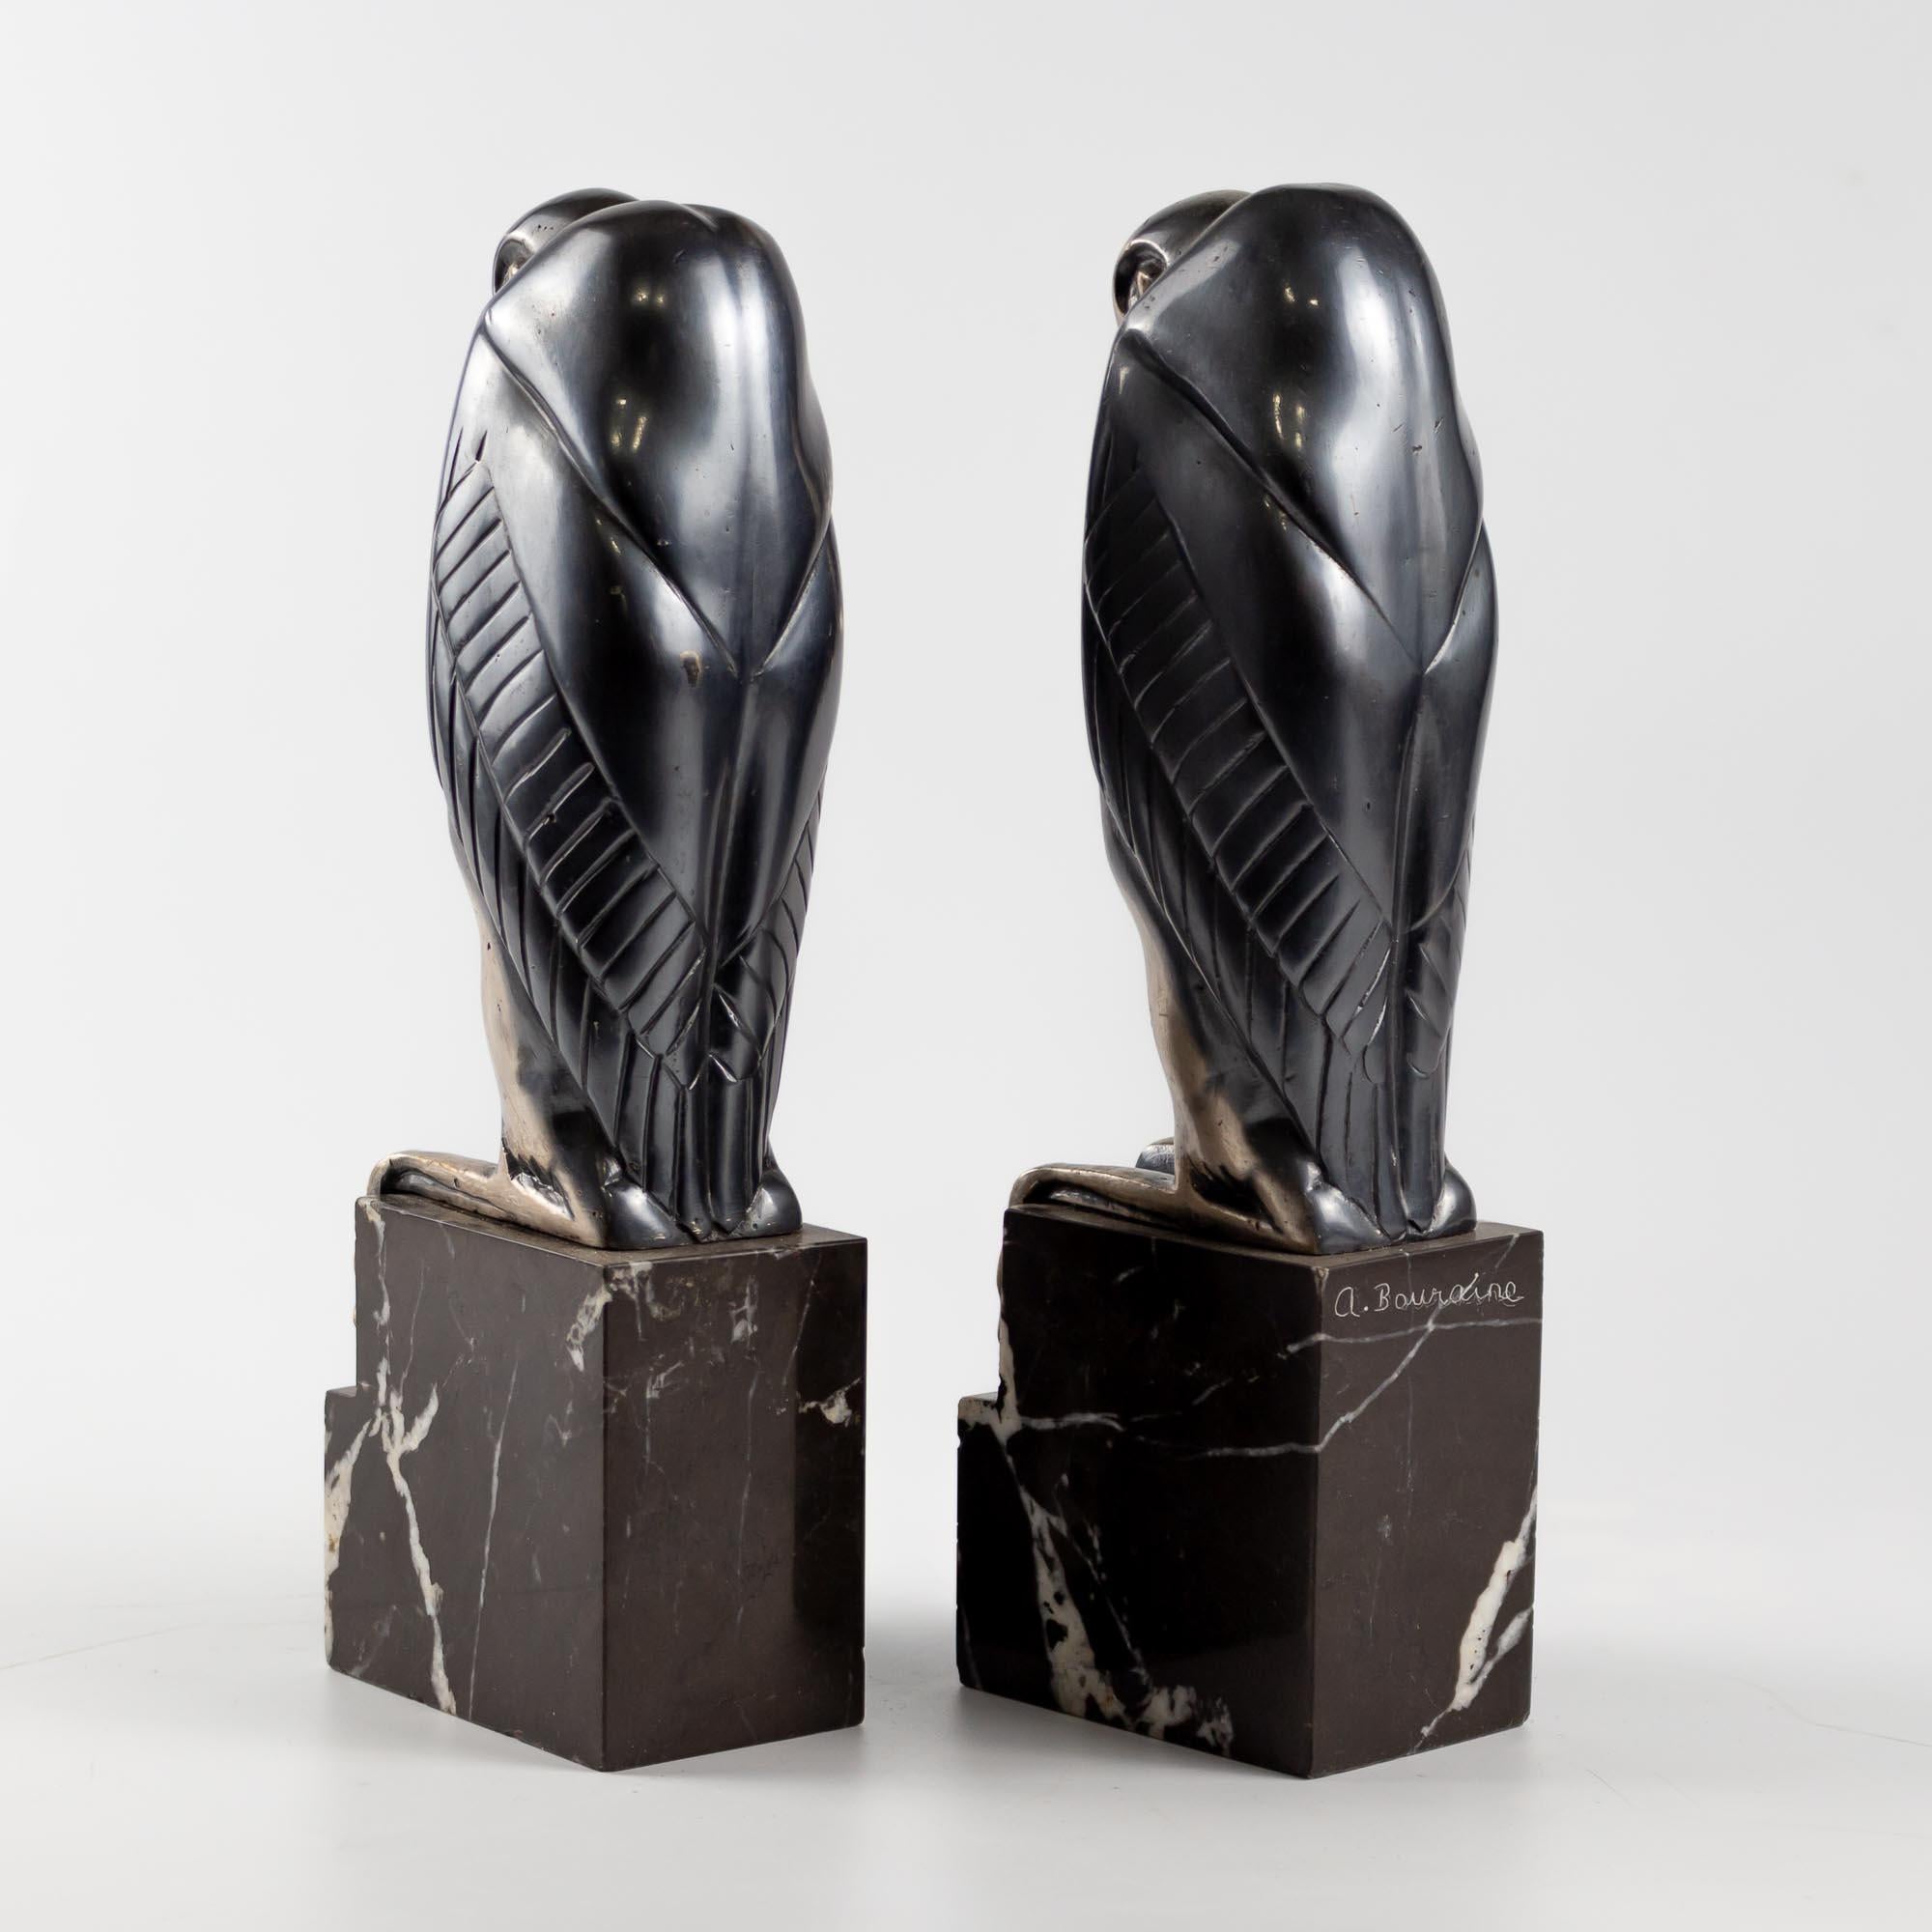 Early 20th Century Pair of Art Deco silvered bronze bookends by Marcel-Andre Bouraine